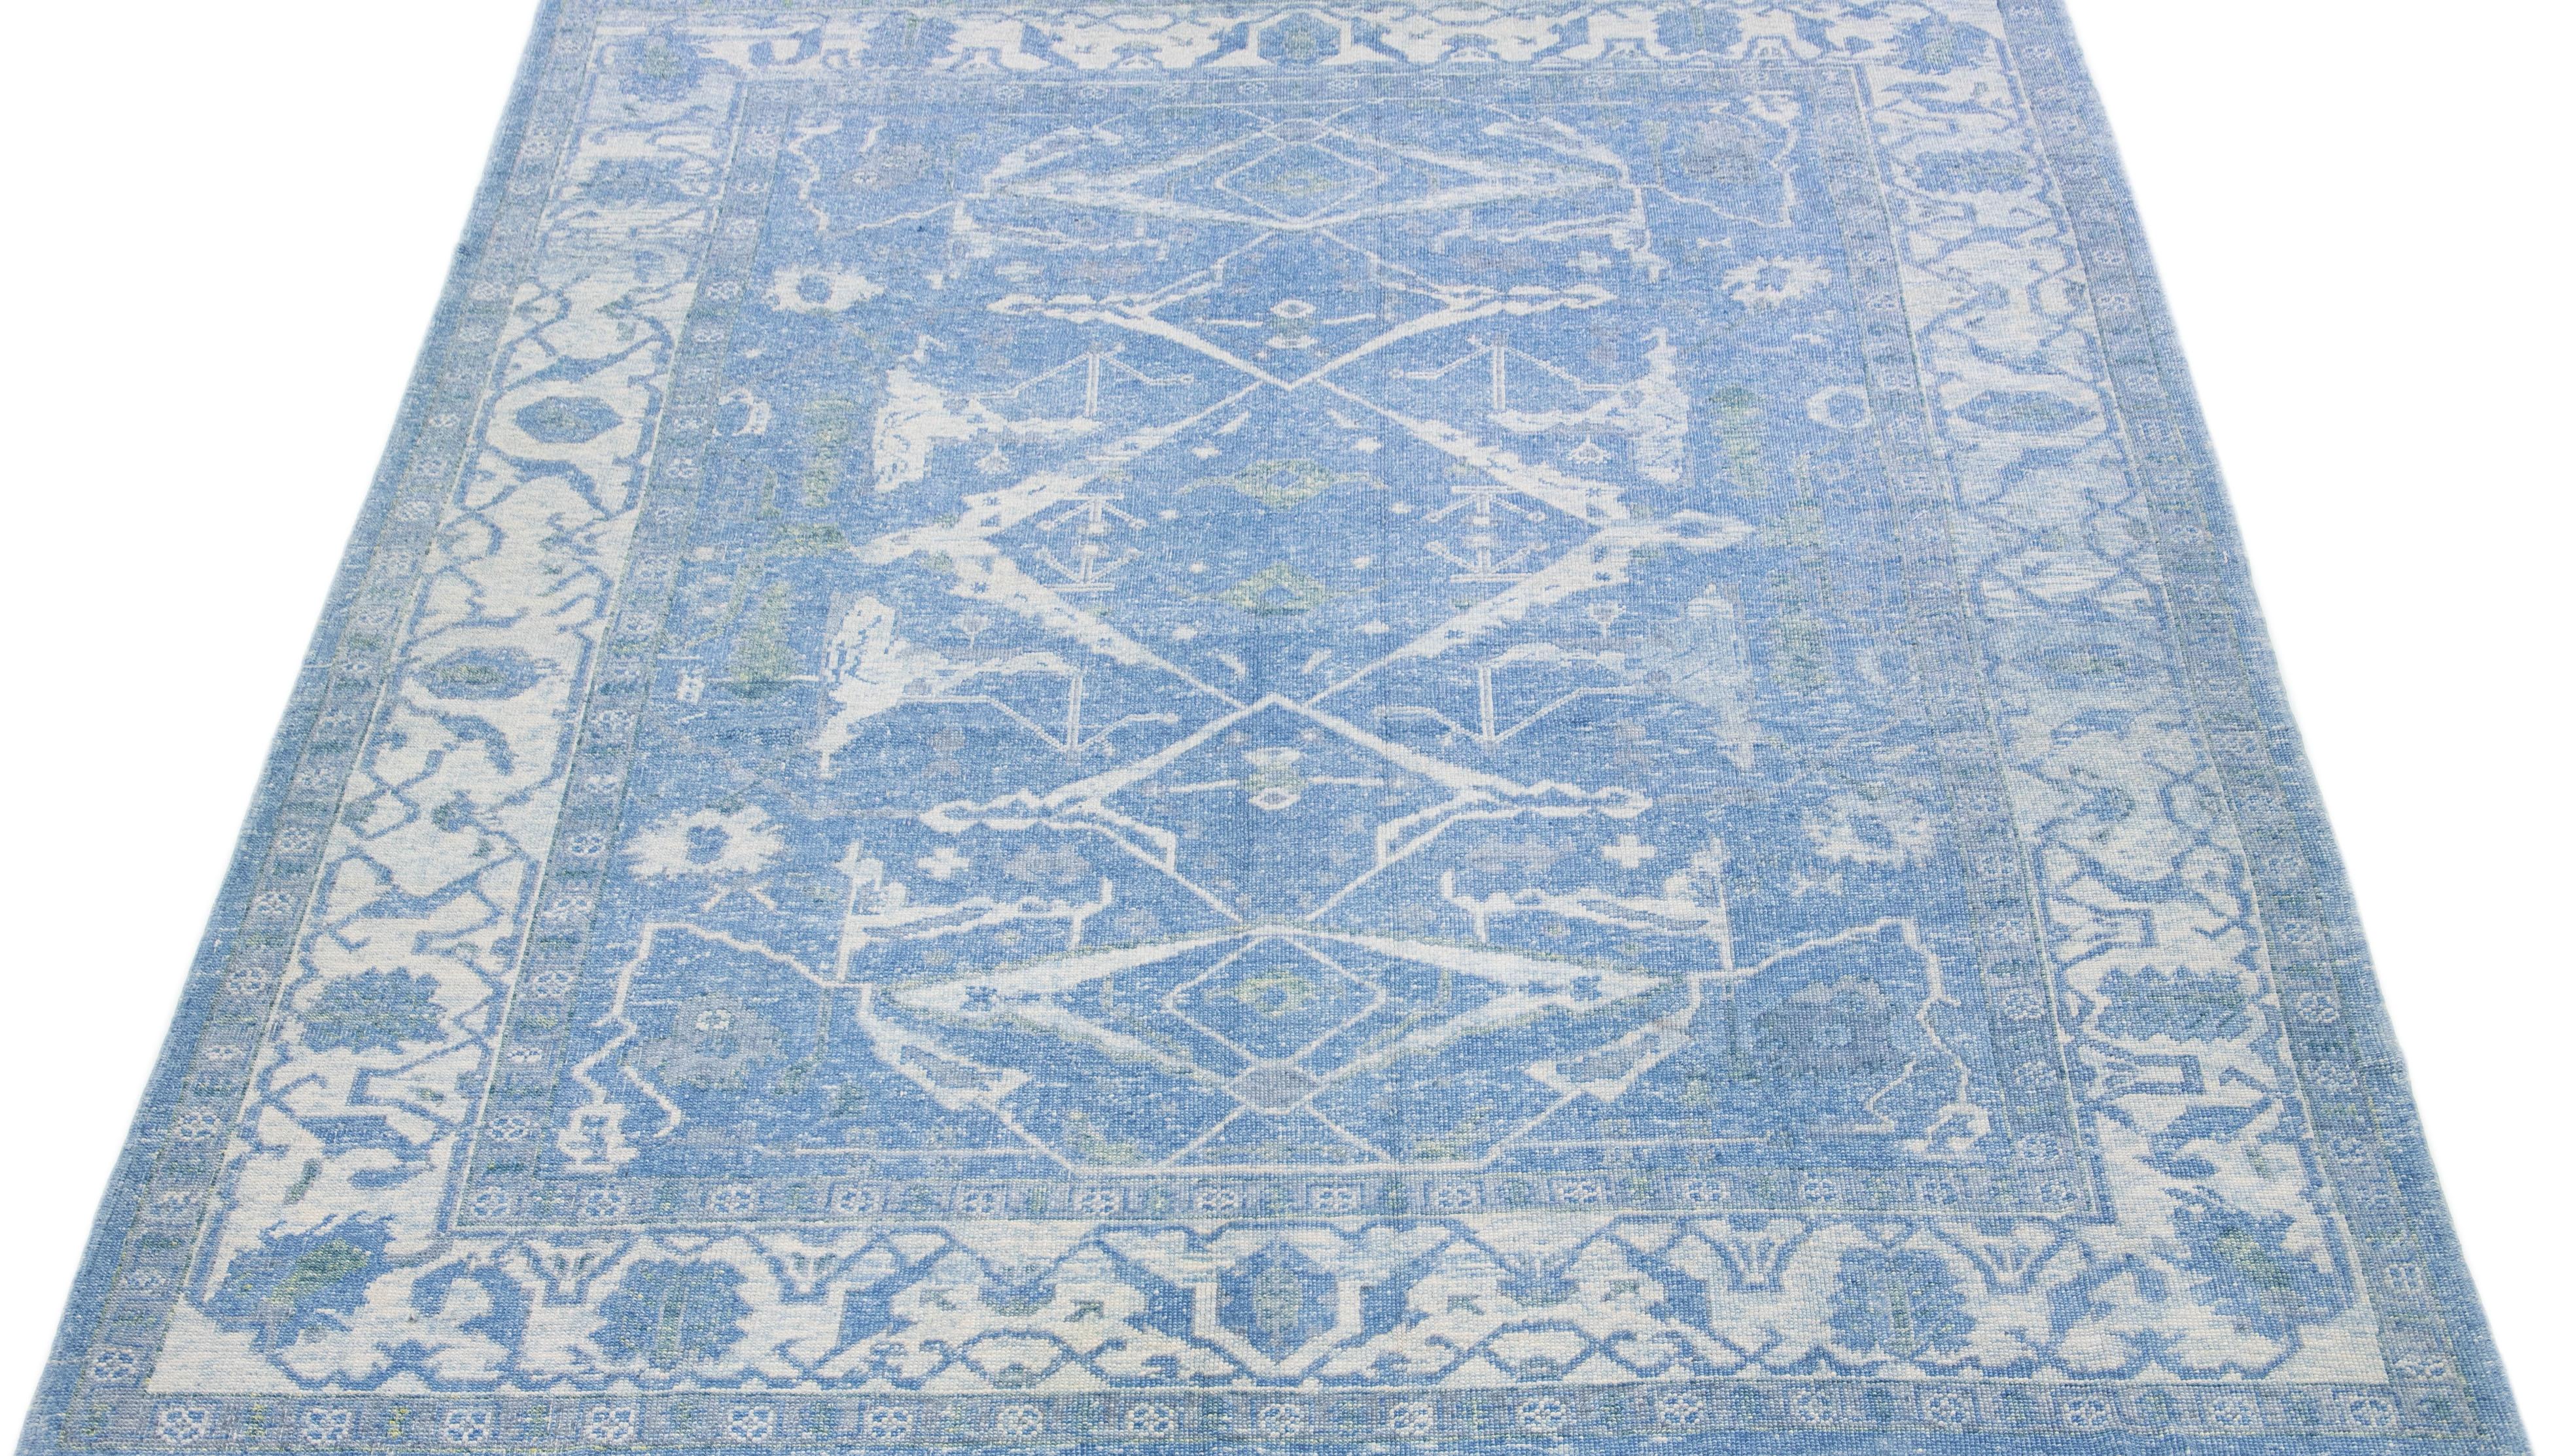 Beautiful modern Oushak hand-knotted wool rug with a blue color field. This Turkish Piece has white and green accent colors in a gorgeous all-over floral design.

This rug measures: 10'1